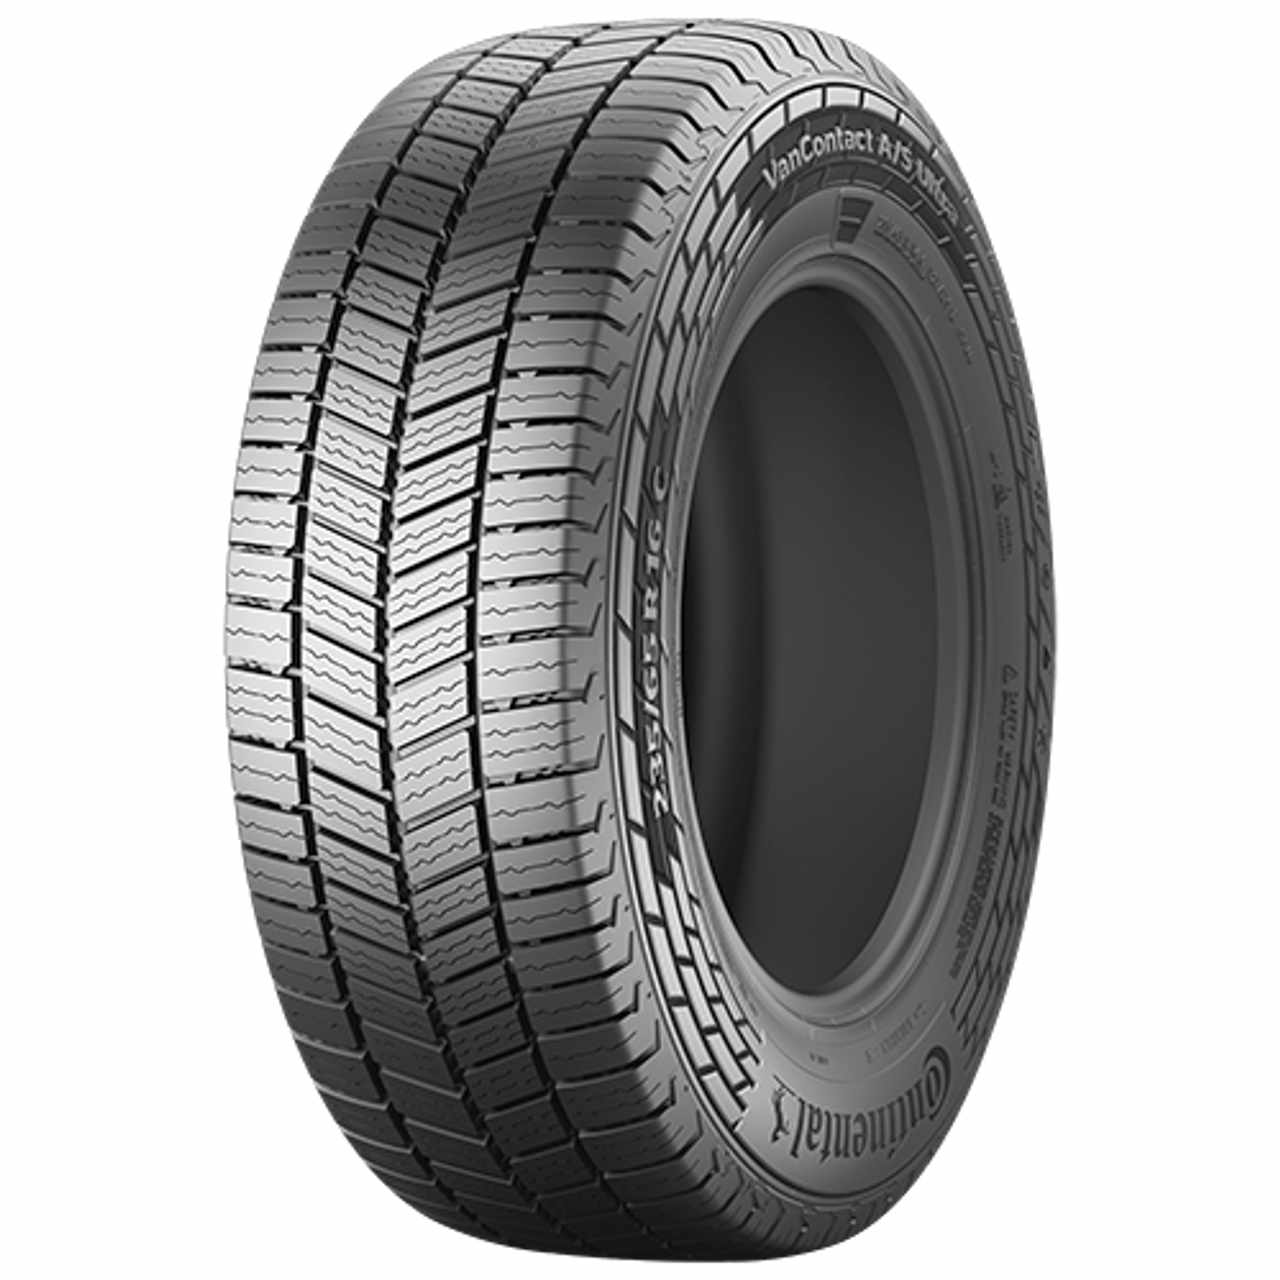 CONTINENTAL VANCONTACT A/S ULTRA 215/65R16C 106T BSW